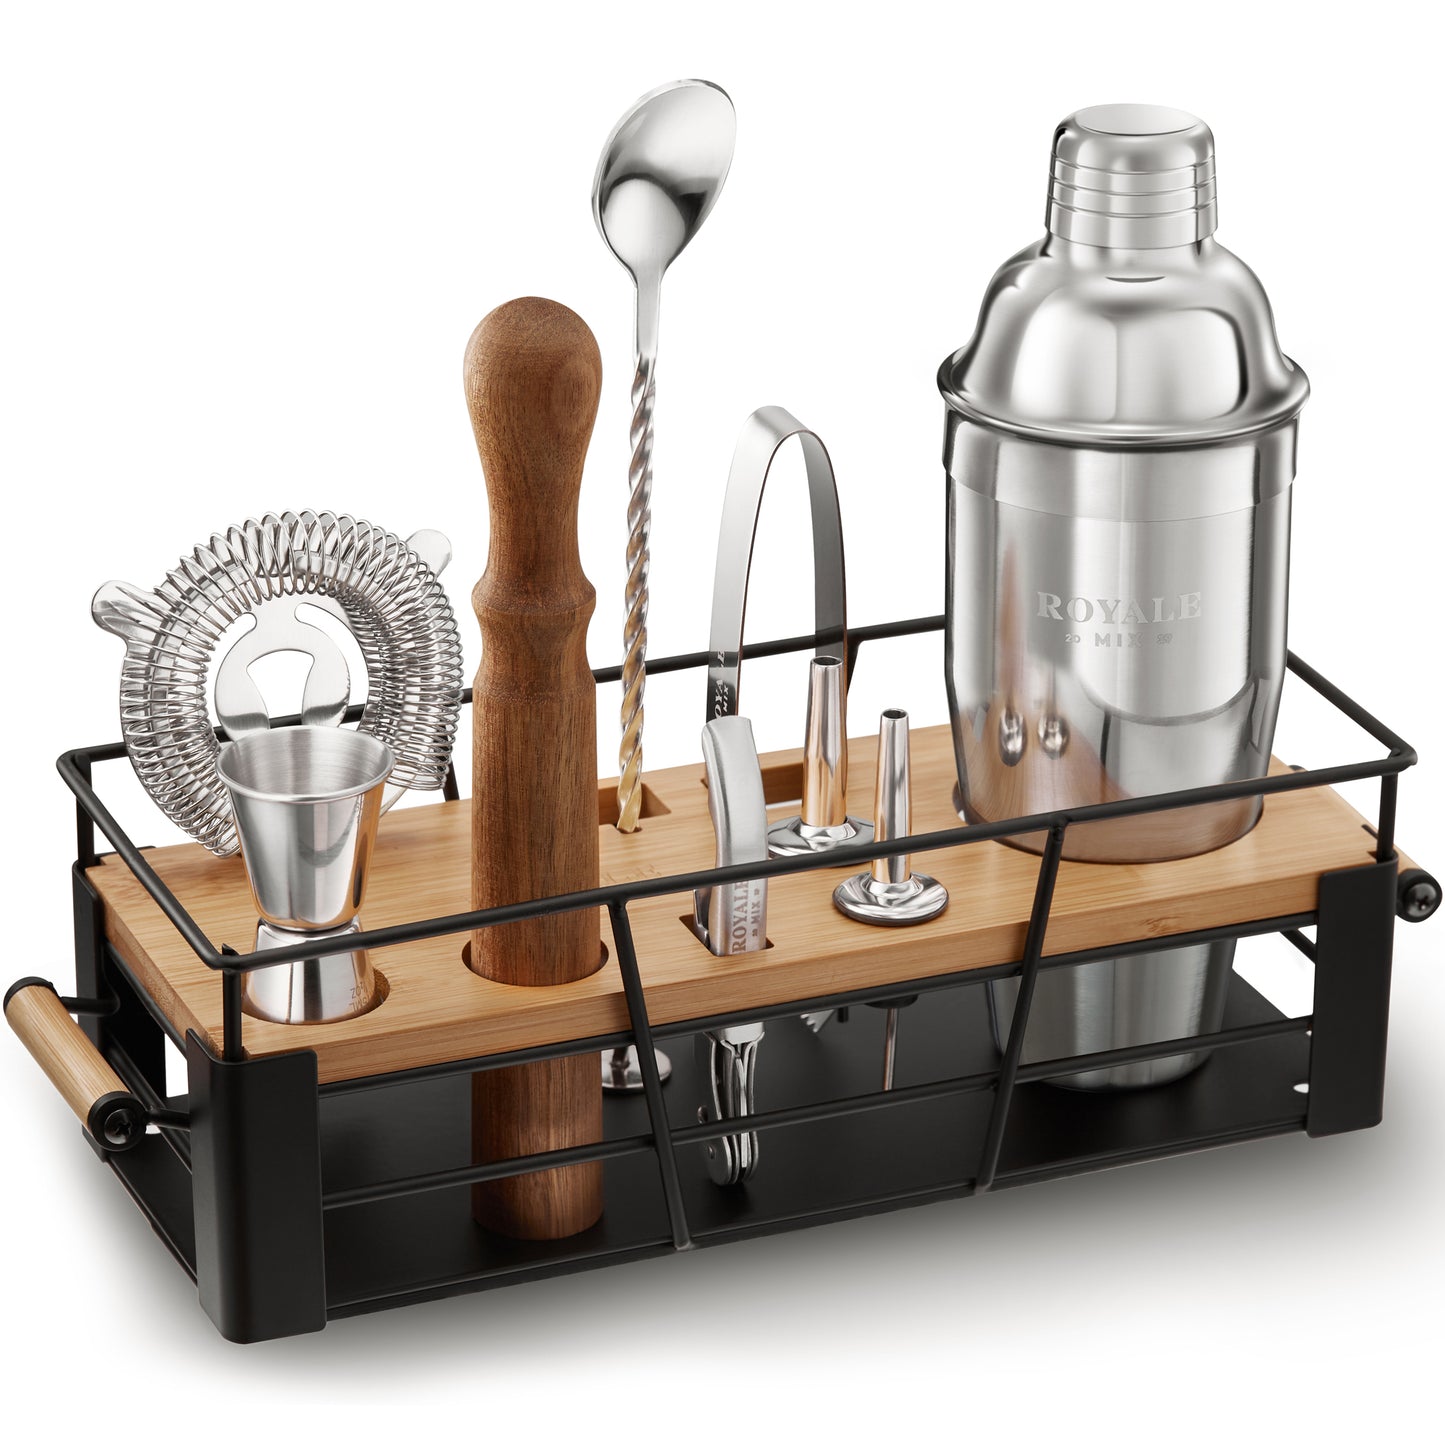 The Essential Home Bartender Kit